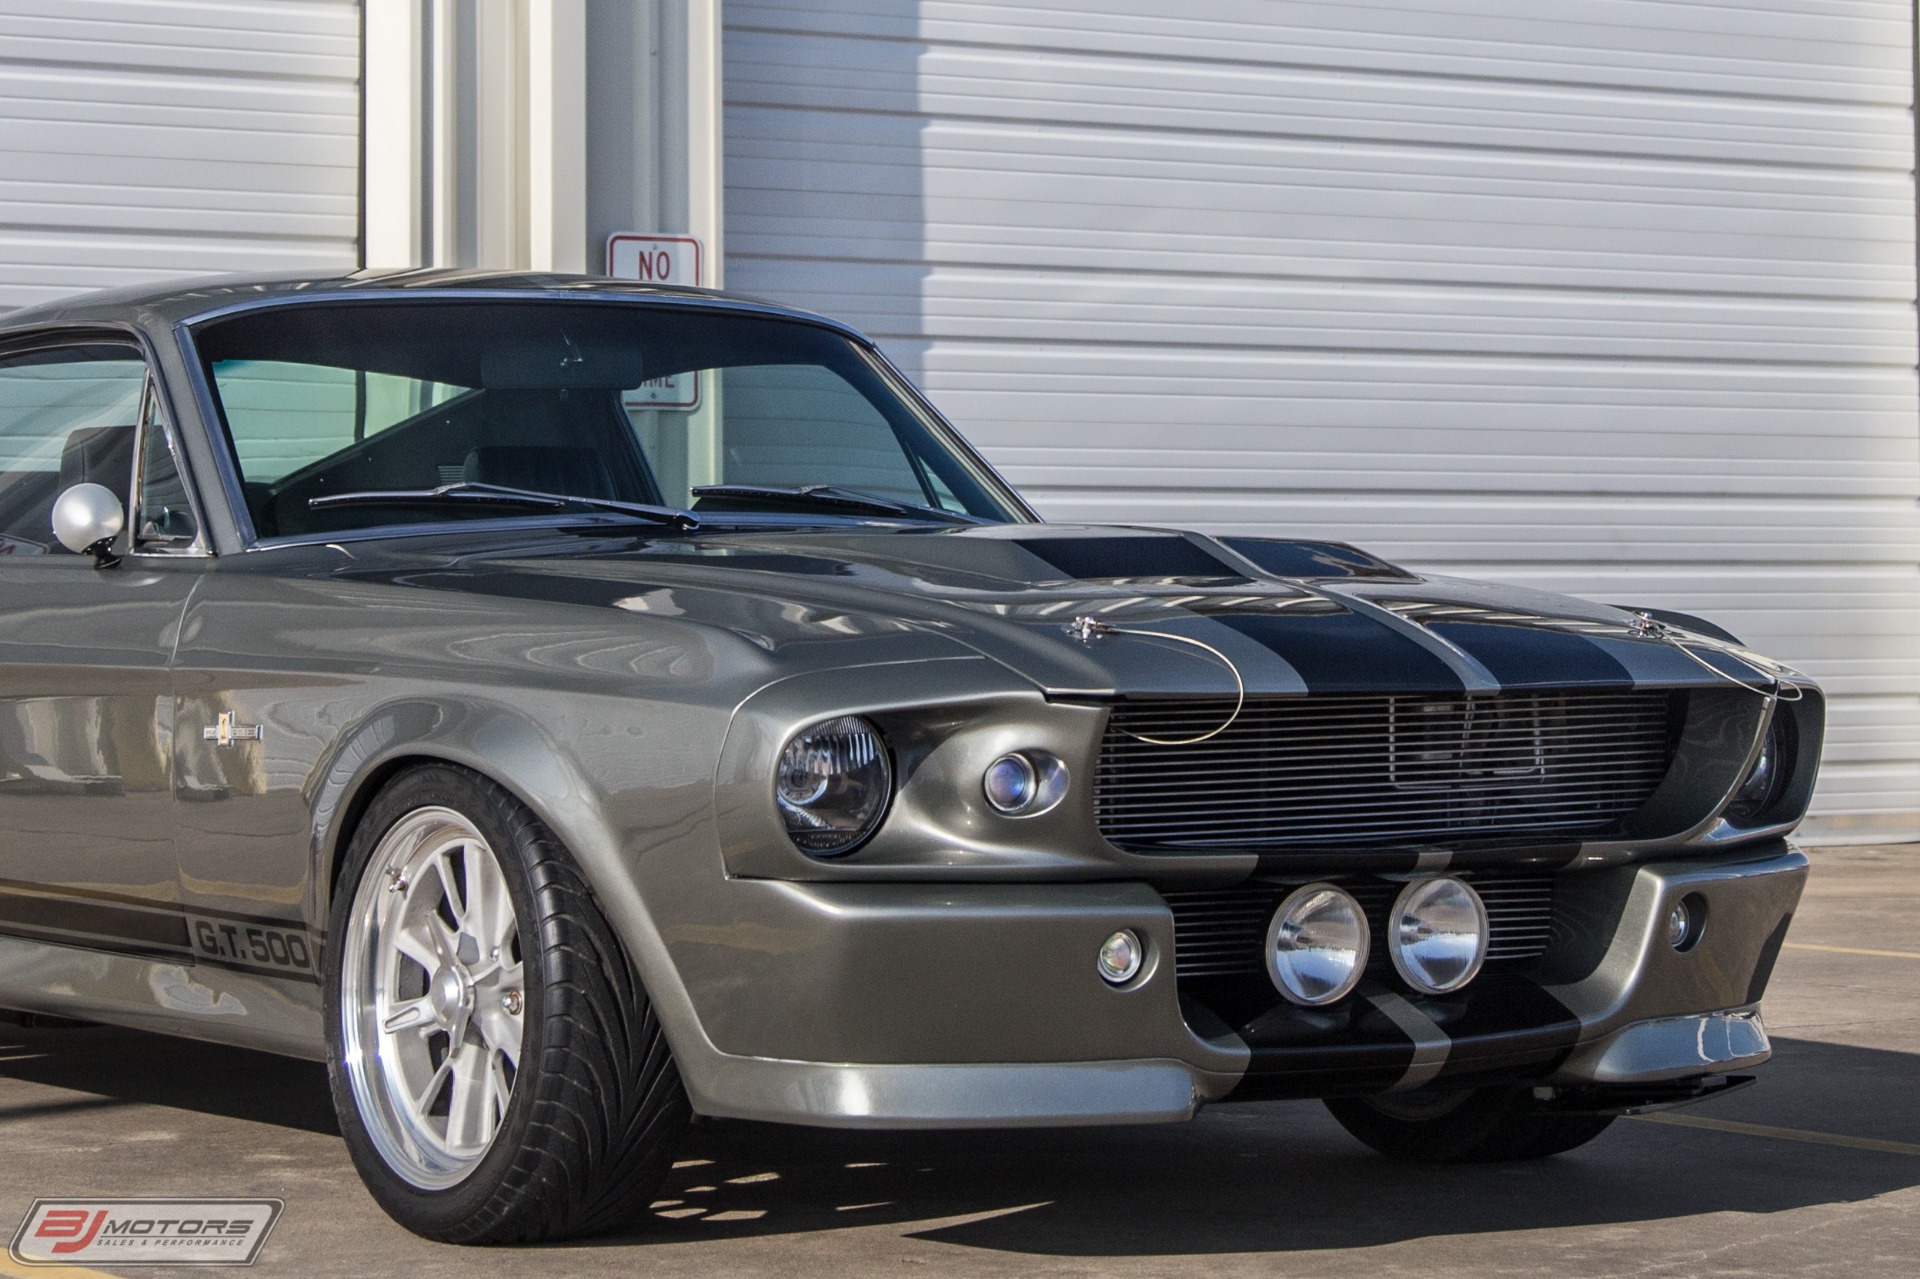 Used 1967 Ford Mustang GT500 Eleanor Clone For Sale ...
 1967 Ford Mustang Eleanor